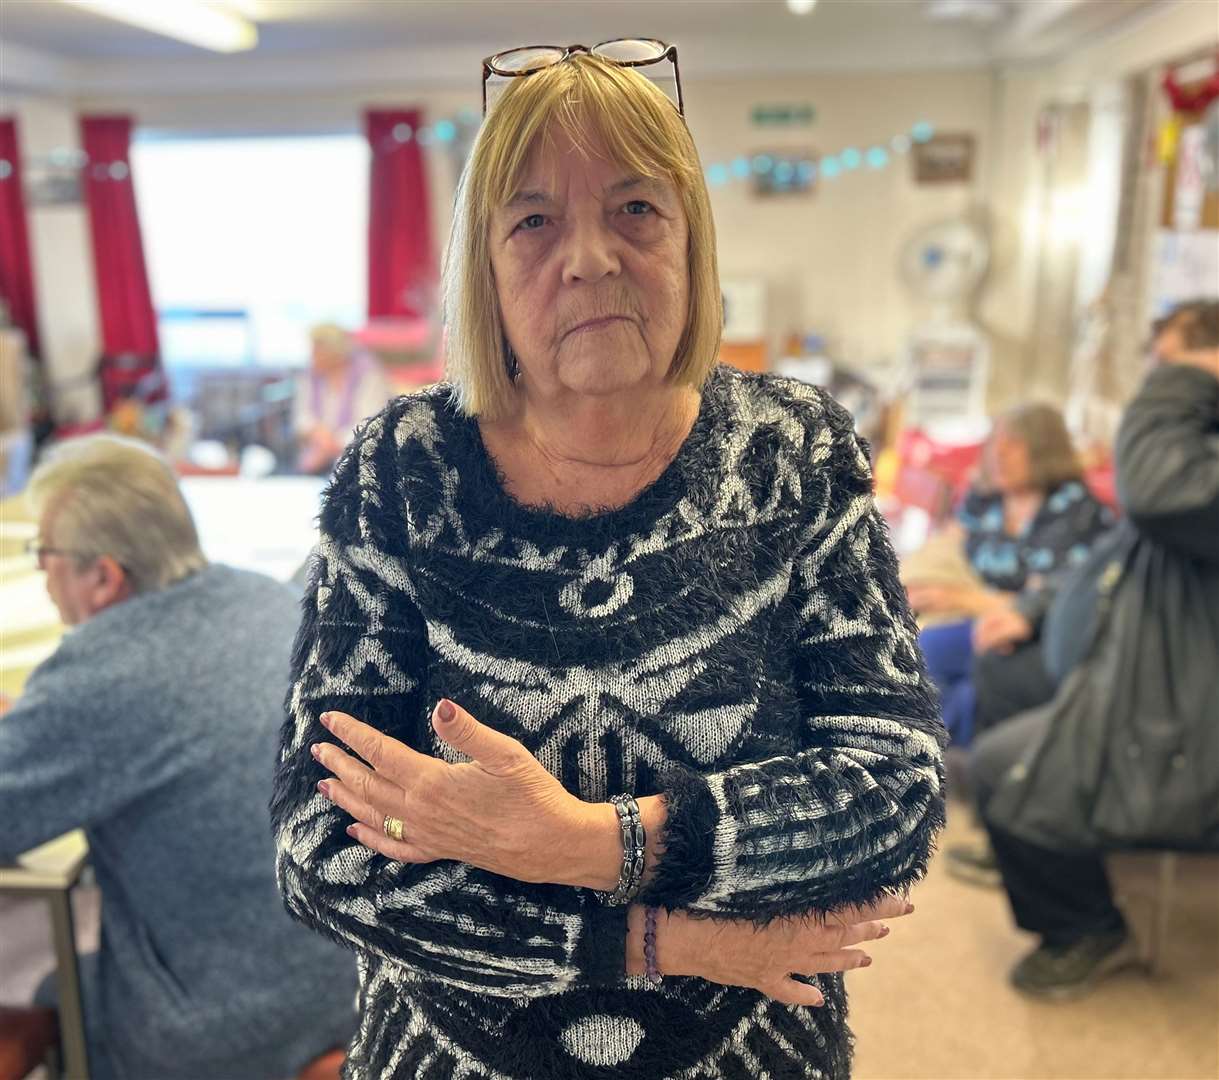 Margaret Tomkins, who lives at St Anne's Court, says residents have been gathering in the lounge to keep warm